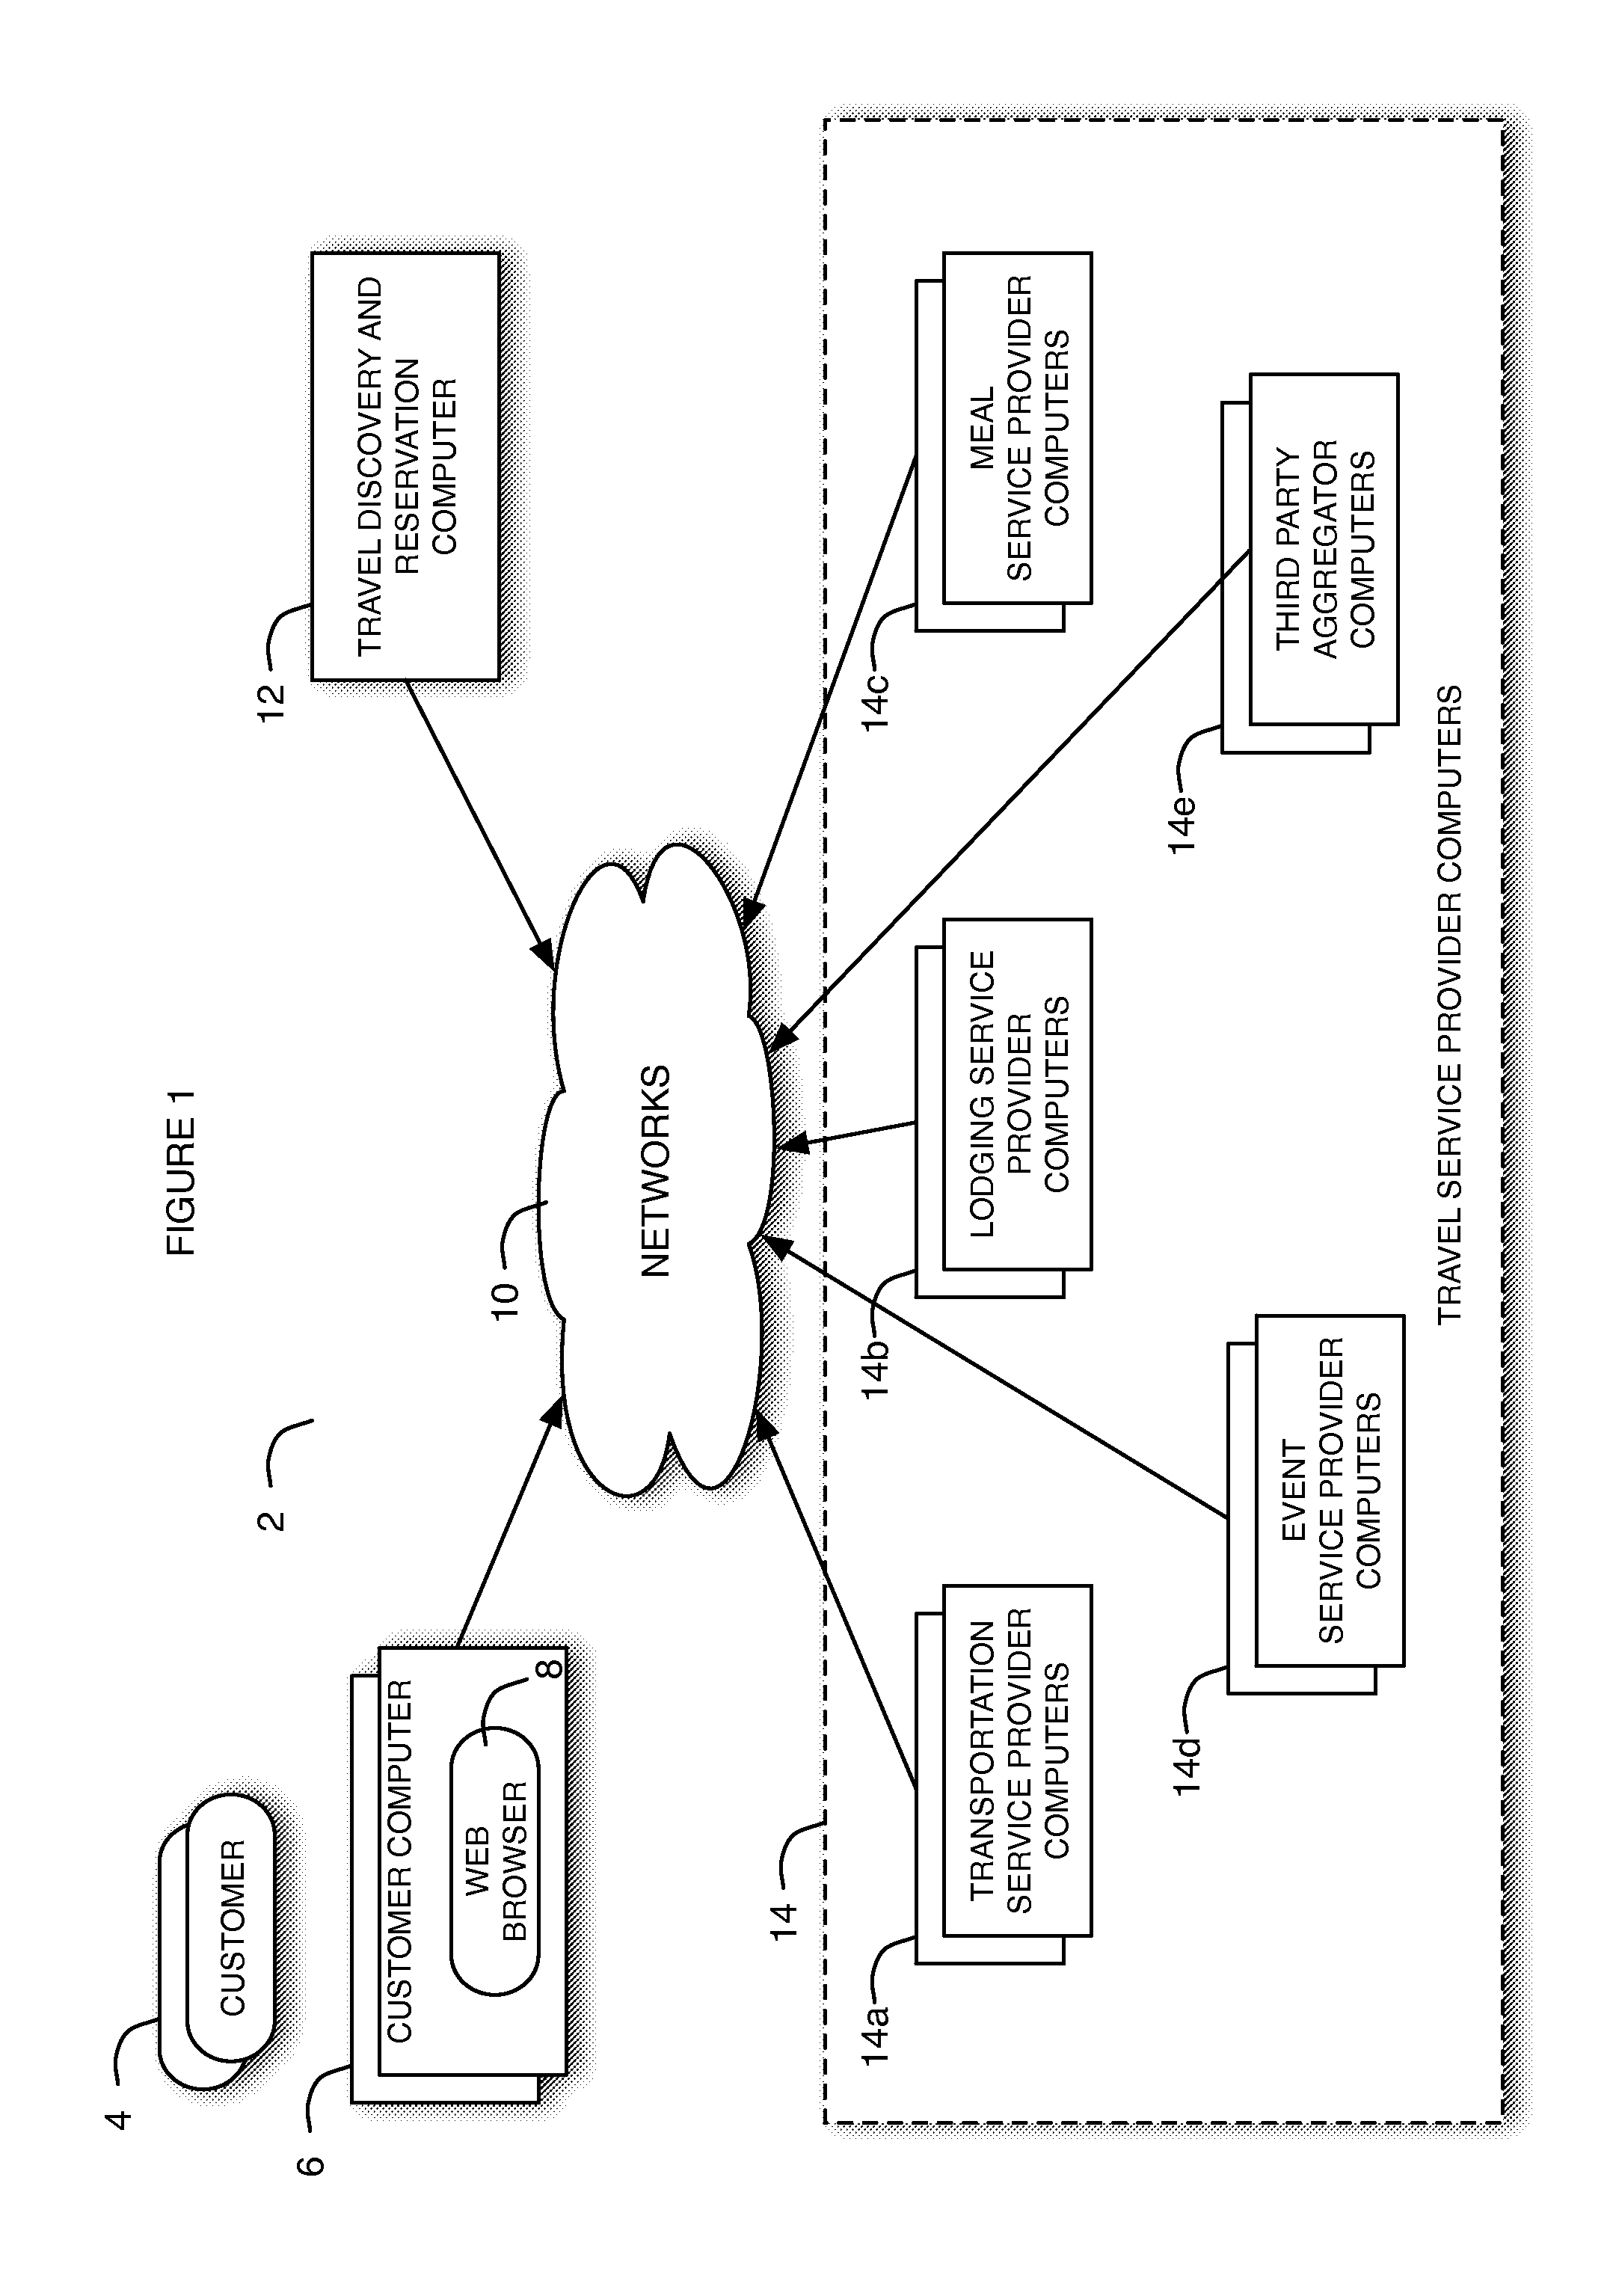 Travel discovery and recommendation method and system